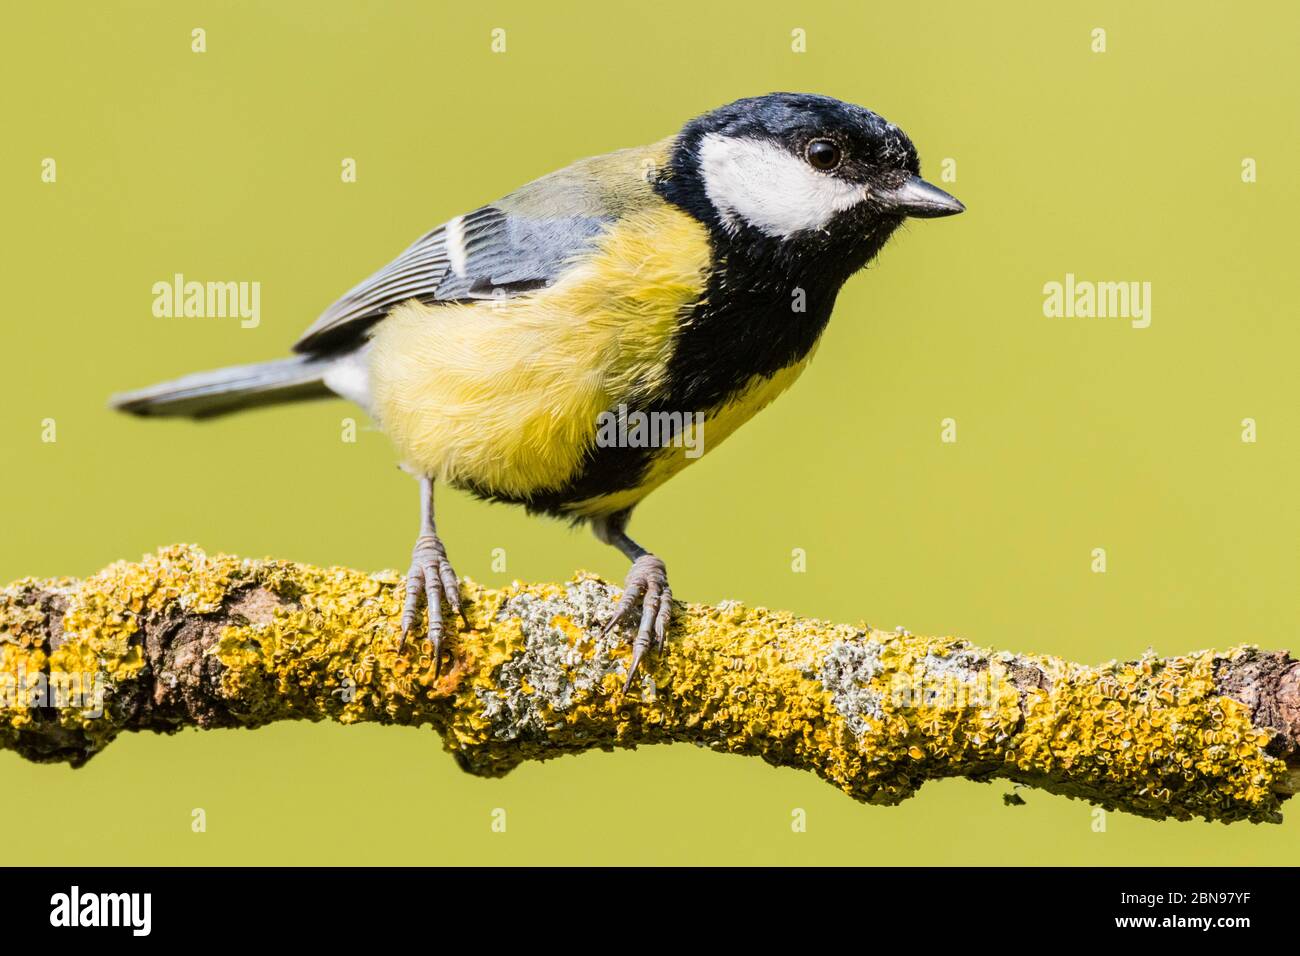 A Great Tit (Parus major) in the Uk Stock Photo